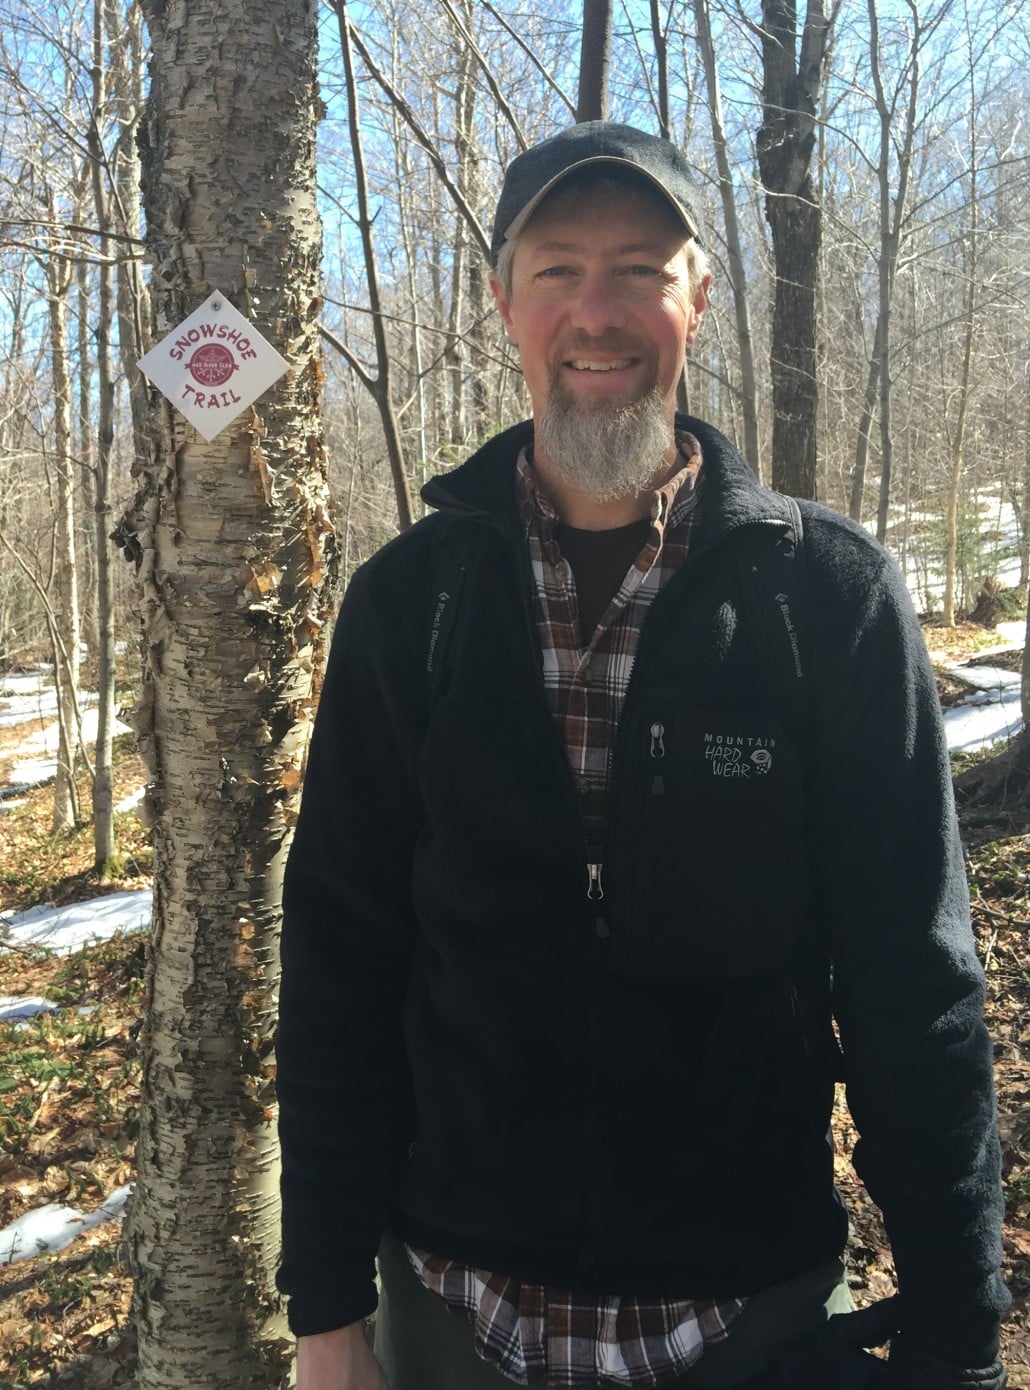 Sean Lawson: Mad River's naturalist guide and beer-maker extraordinaire!